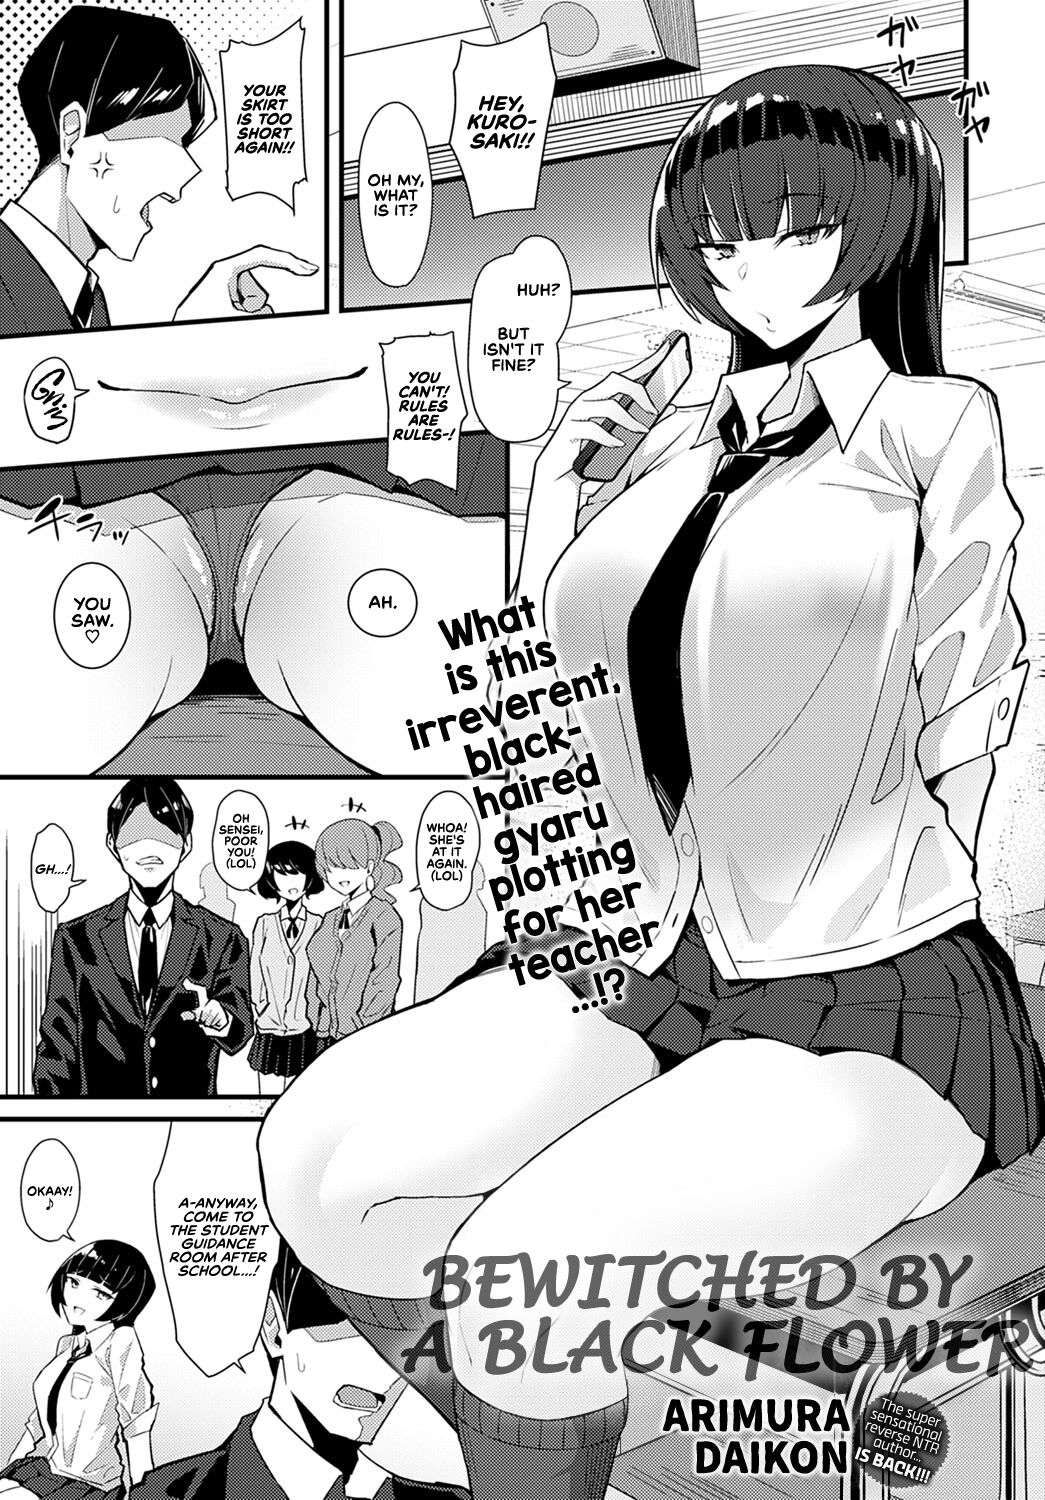 Bewitched by a Black Flower [Arimura Daikon] - 1 . Bewitched by a Black  Flower - Chapter 1 [Arimura Daikon] - AllPornComic